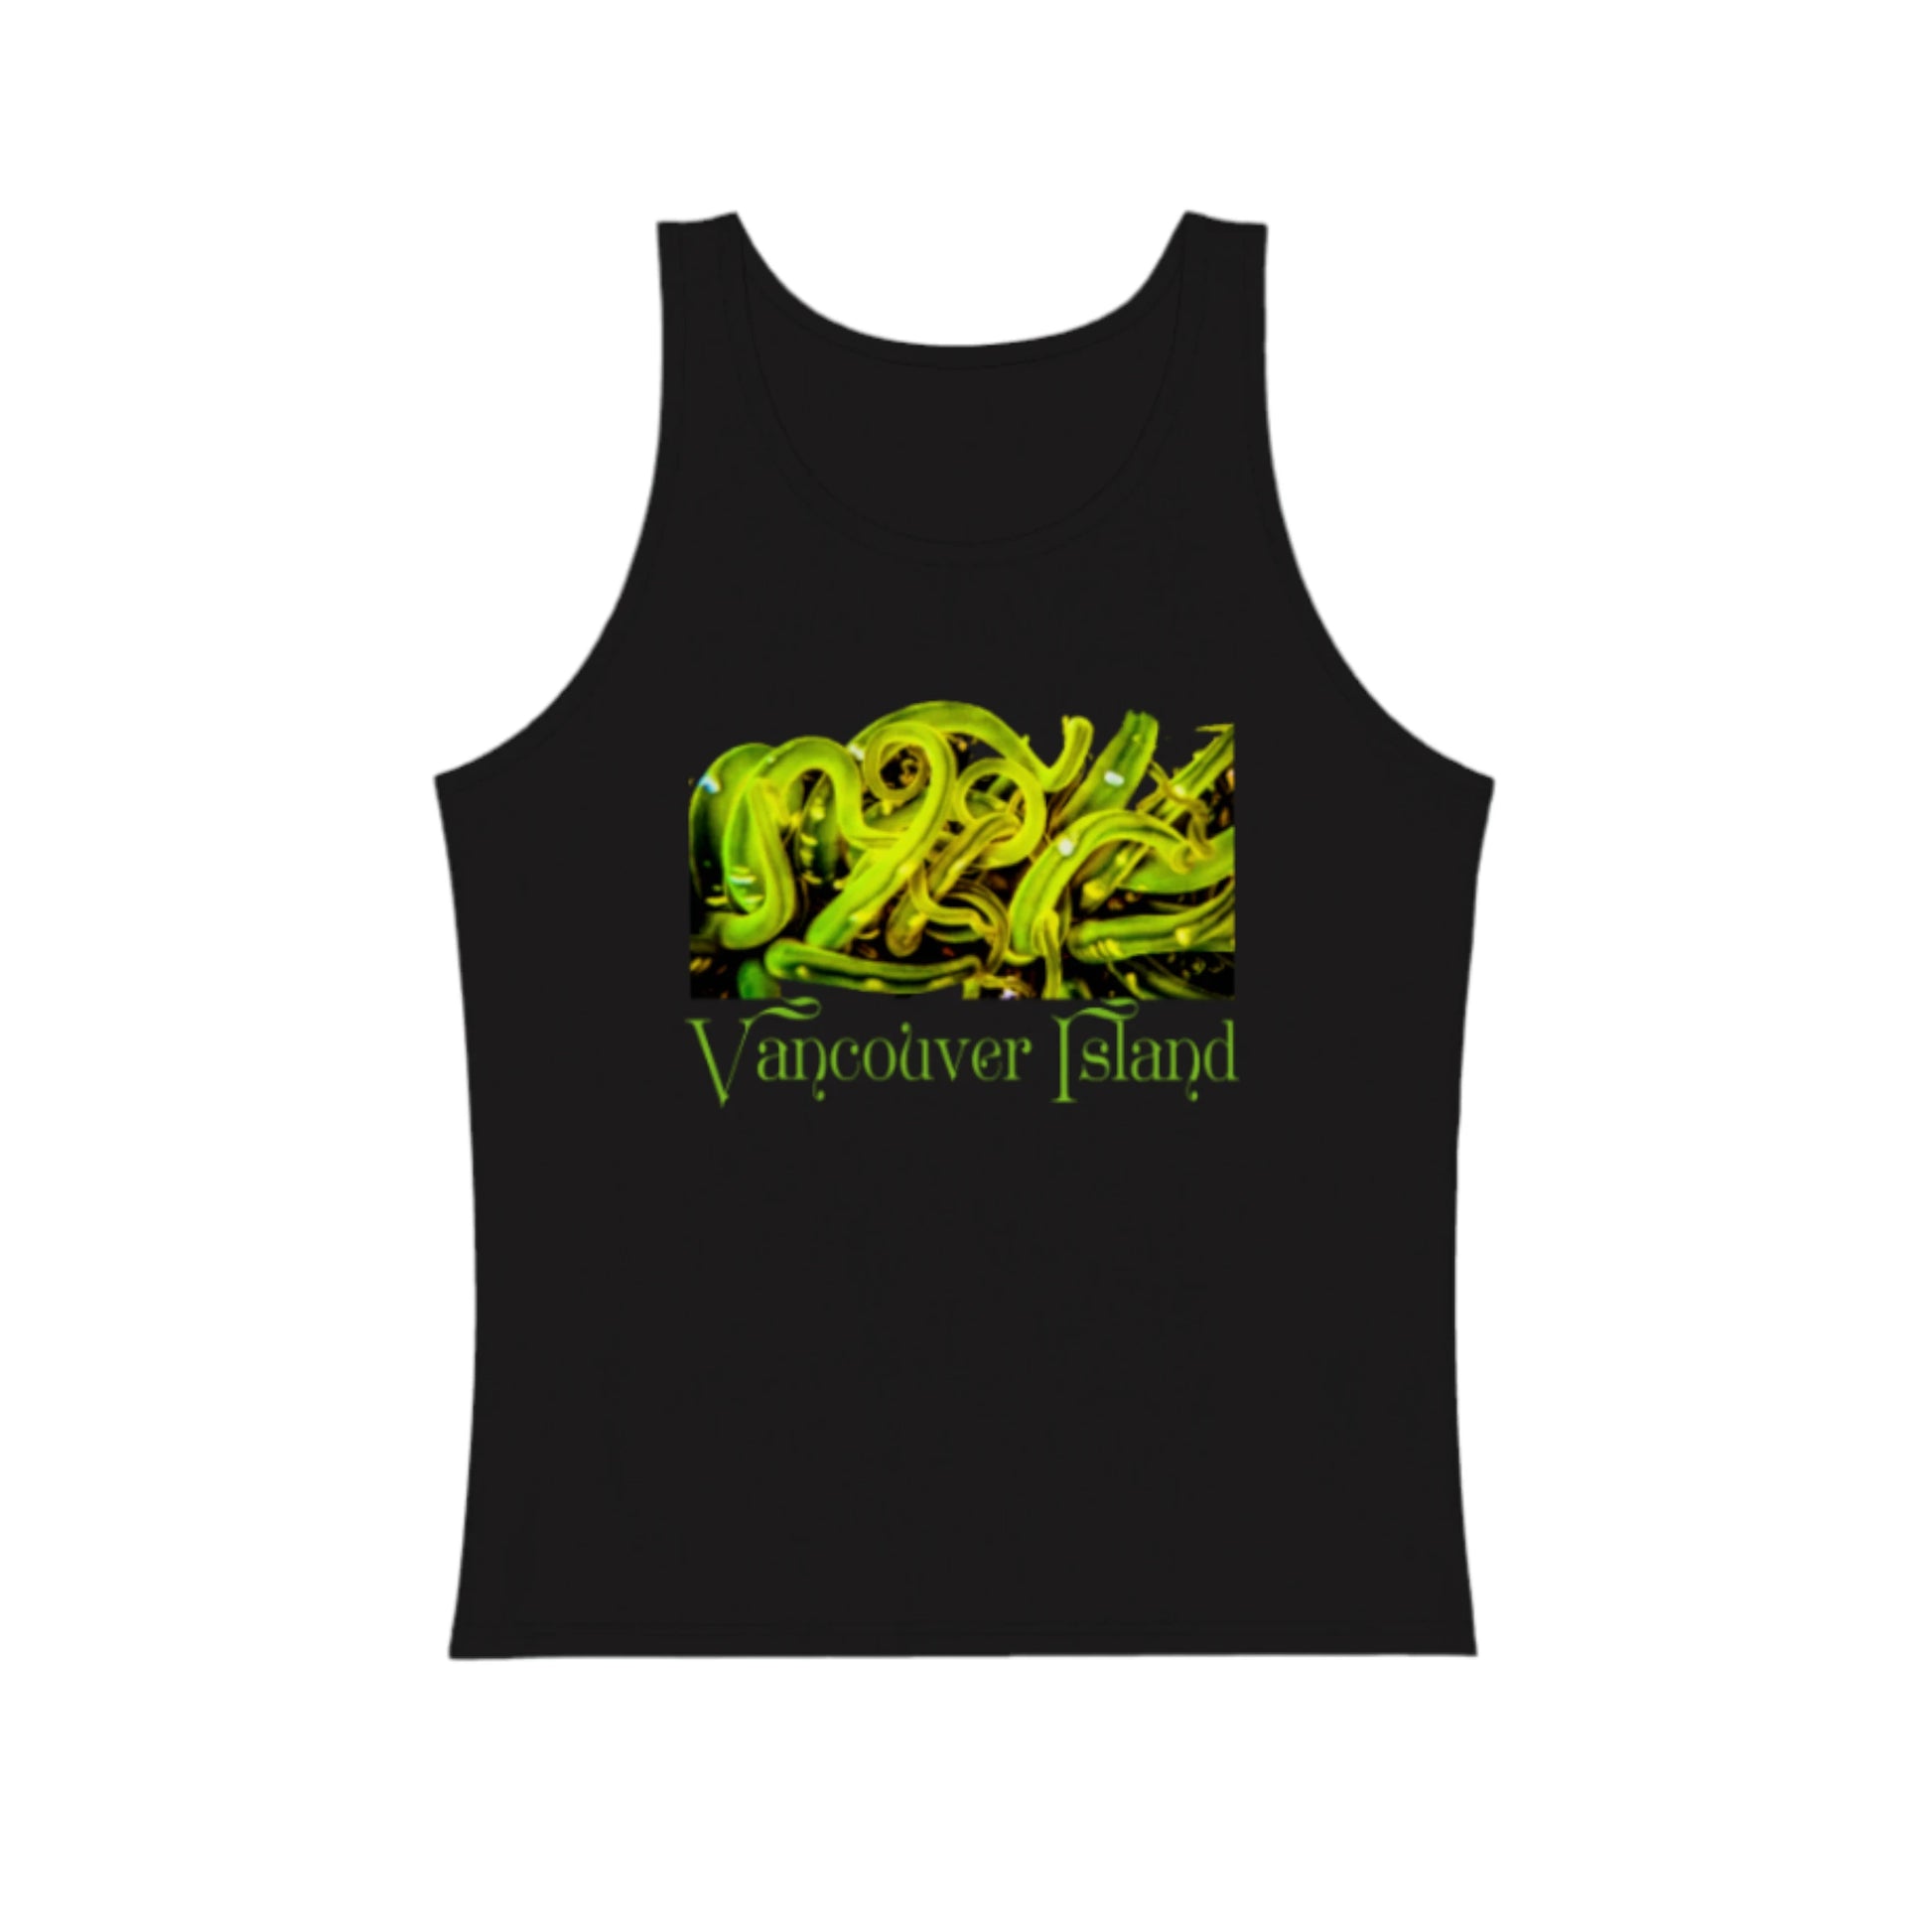 Sea Anemone Vancouver Island premium unisex tank top in black.  The green sea anemone is underwater on the front of the top. by van isle goddess dot com